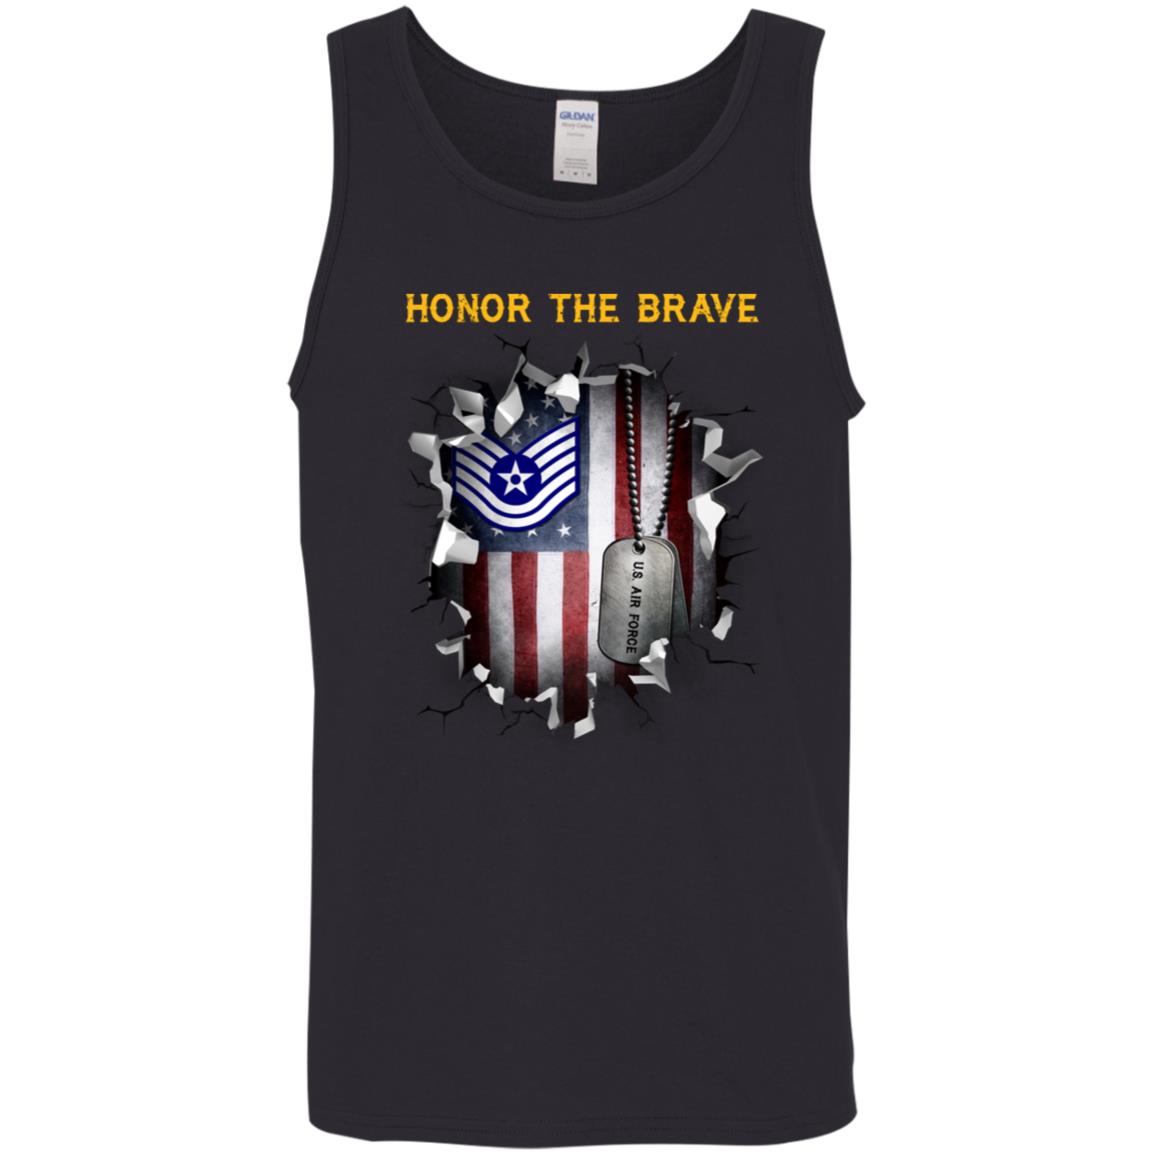 US Air Force E-6 Technical Sergeant TSgt E6 Noncommissioned Officer  - Honor The BraveAF  - Honor The Brave - Honor The Brave Front Shirt